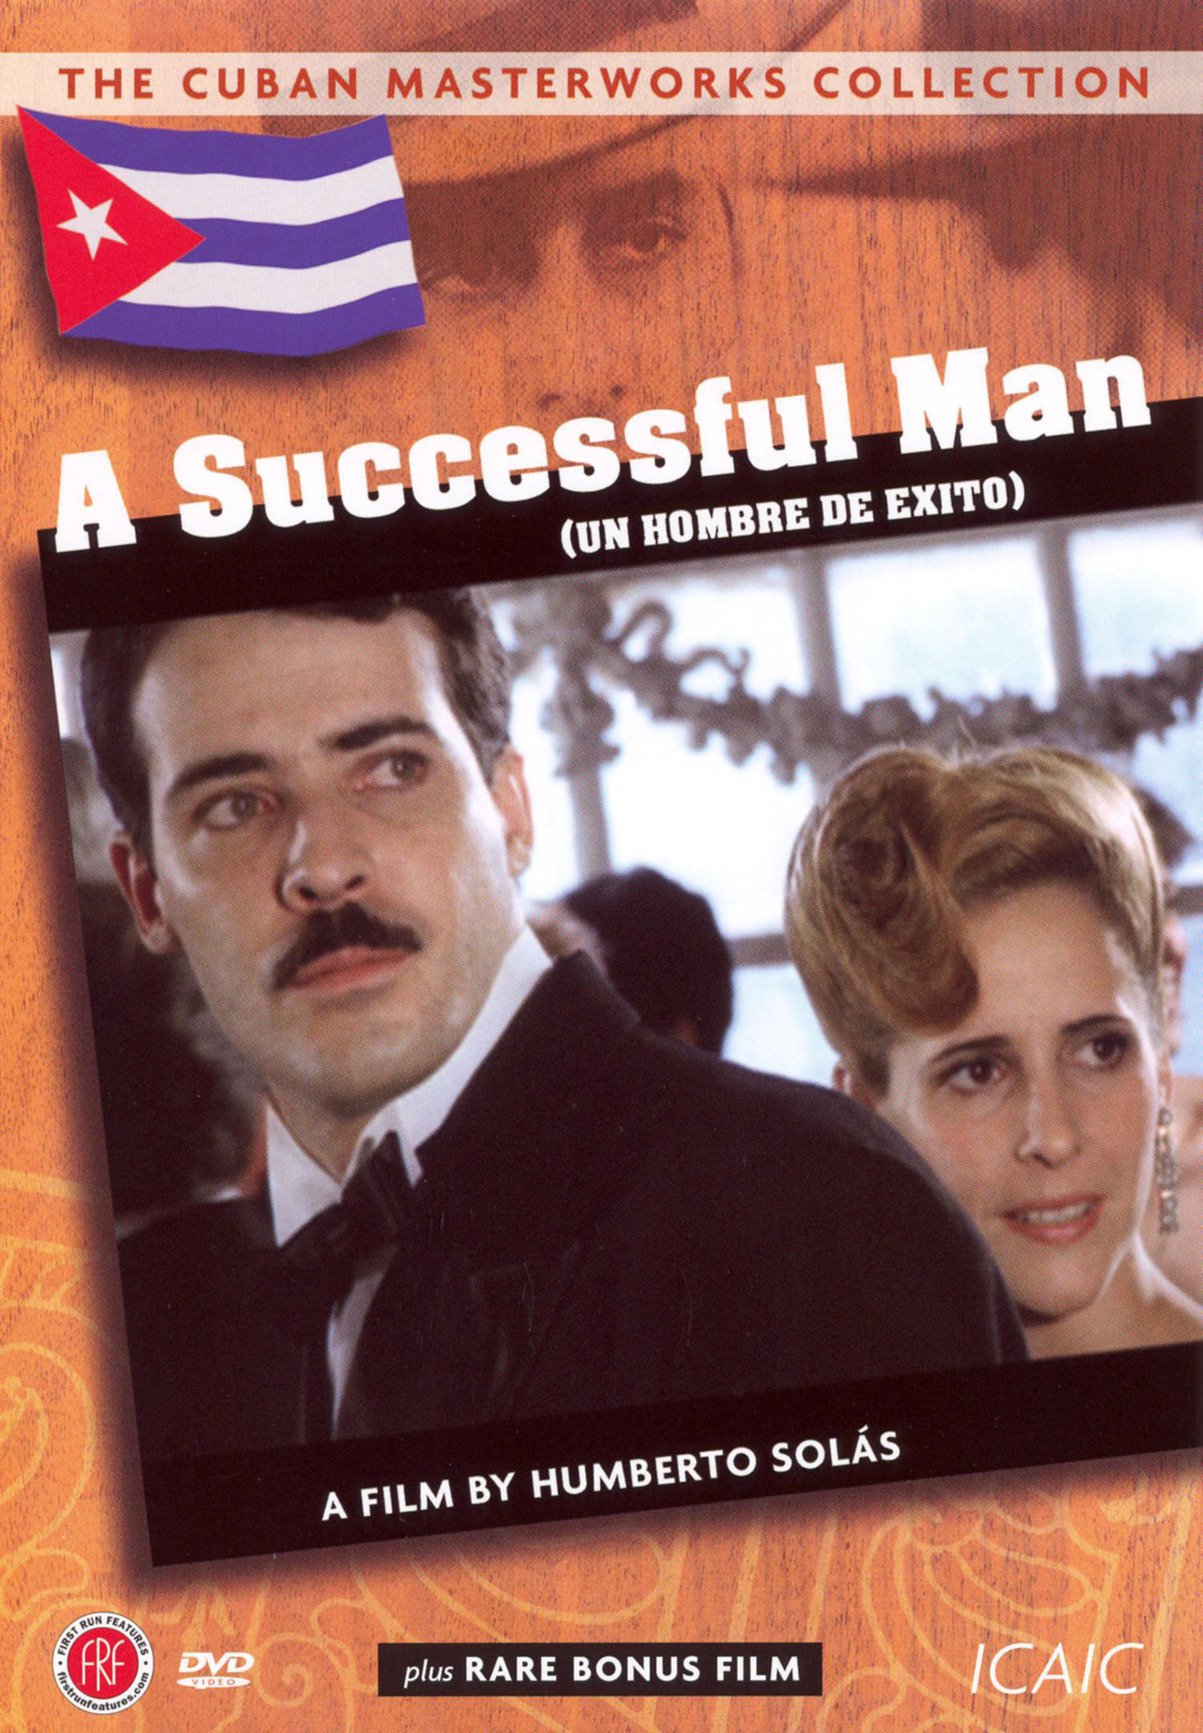 Poster of the movie A Successful Man